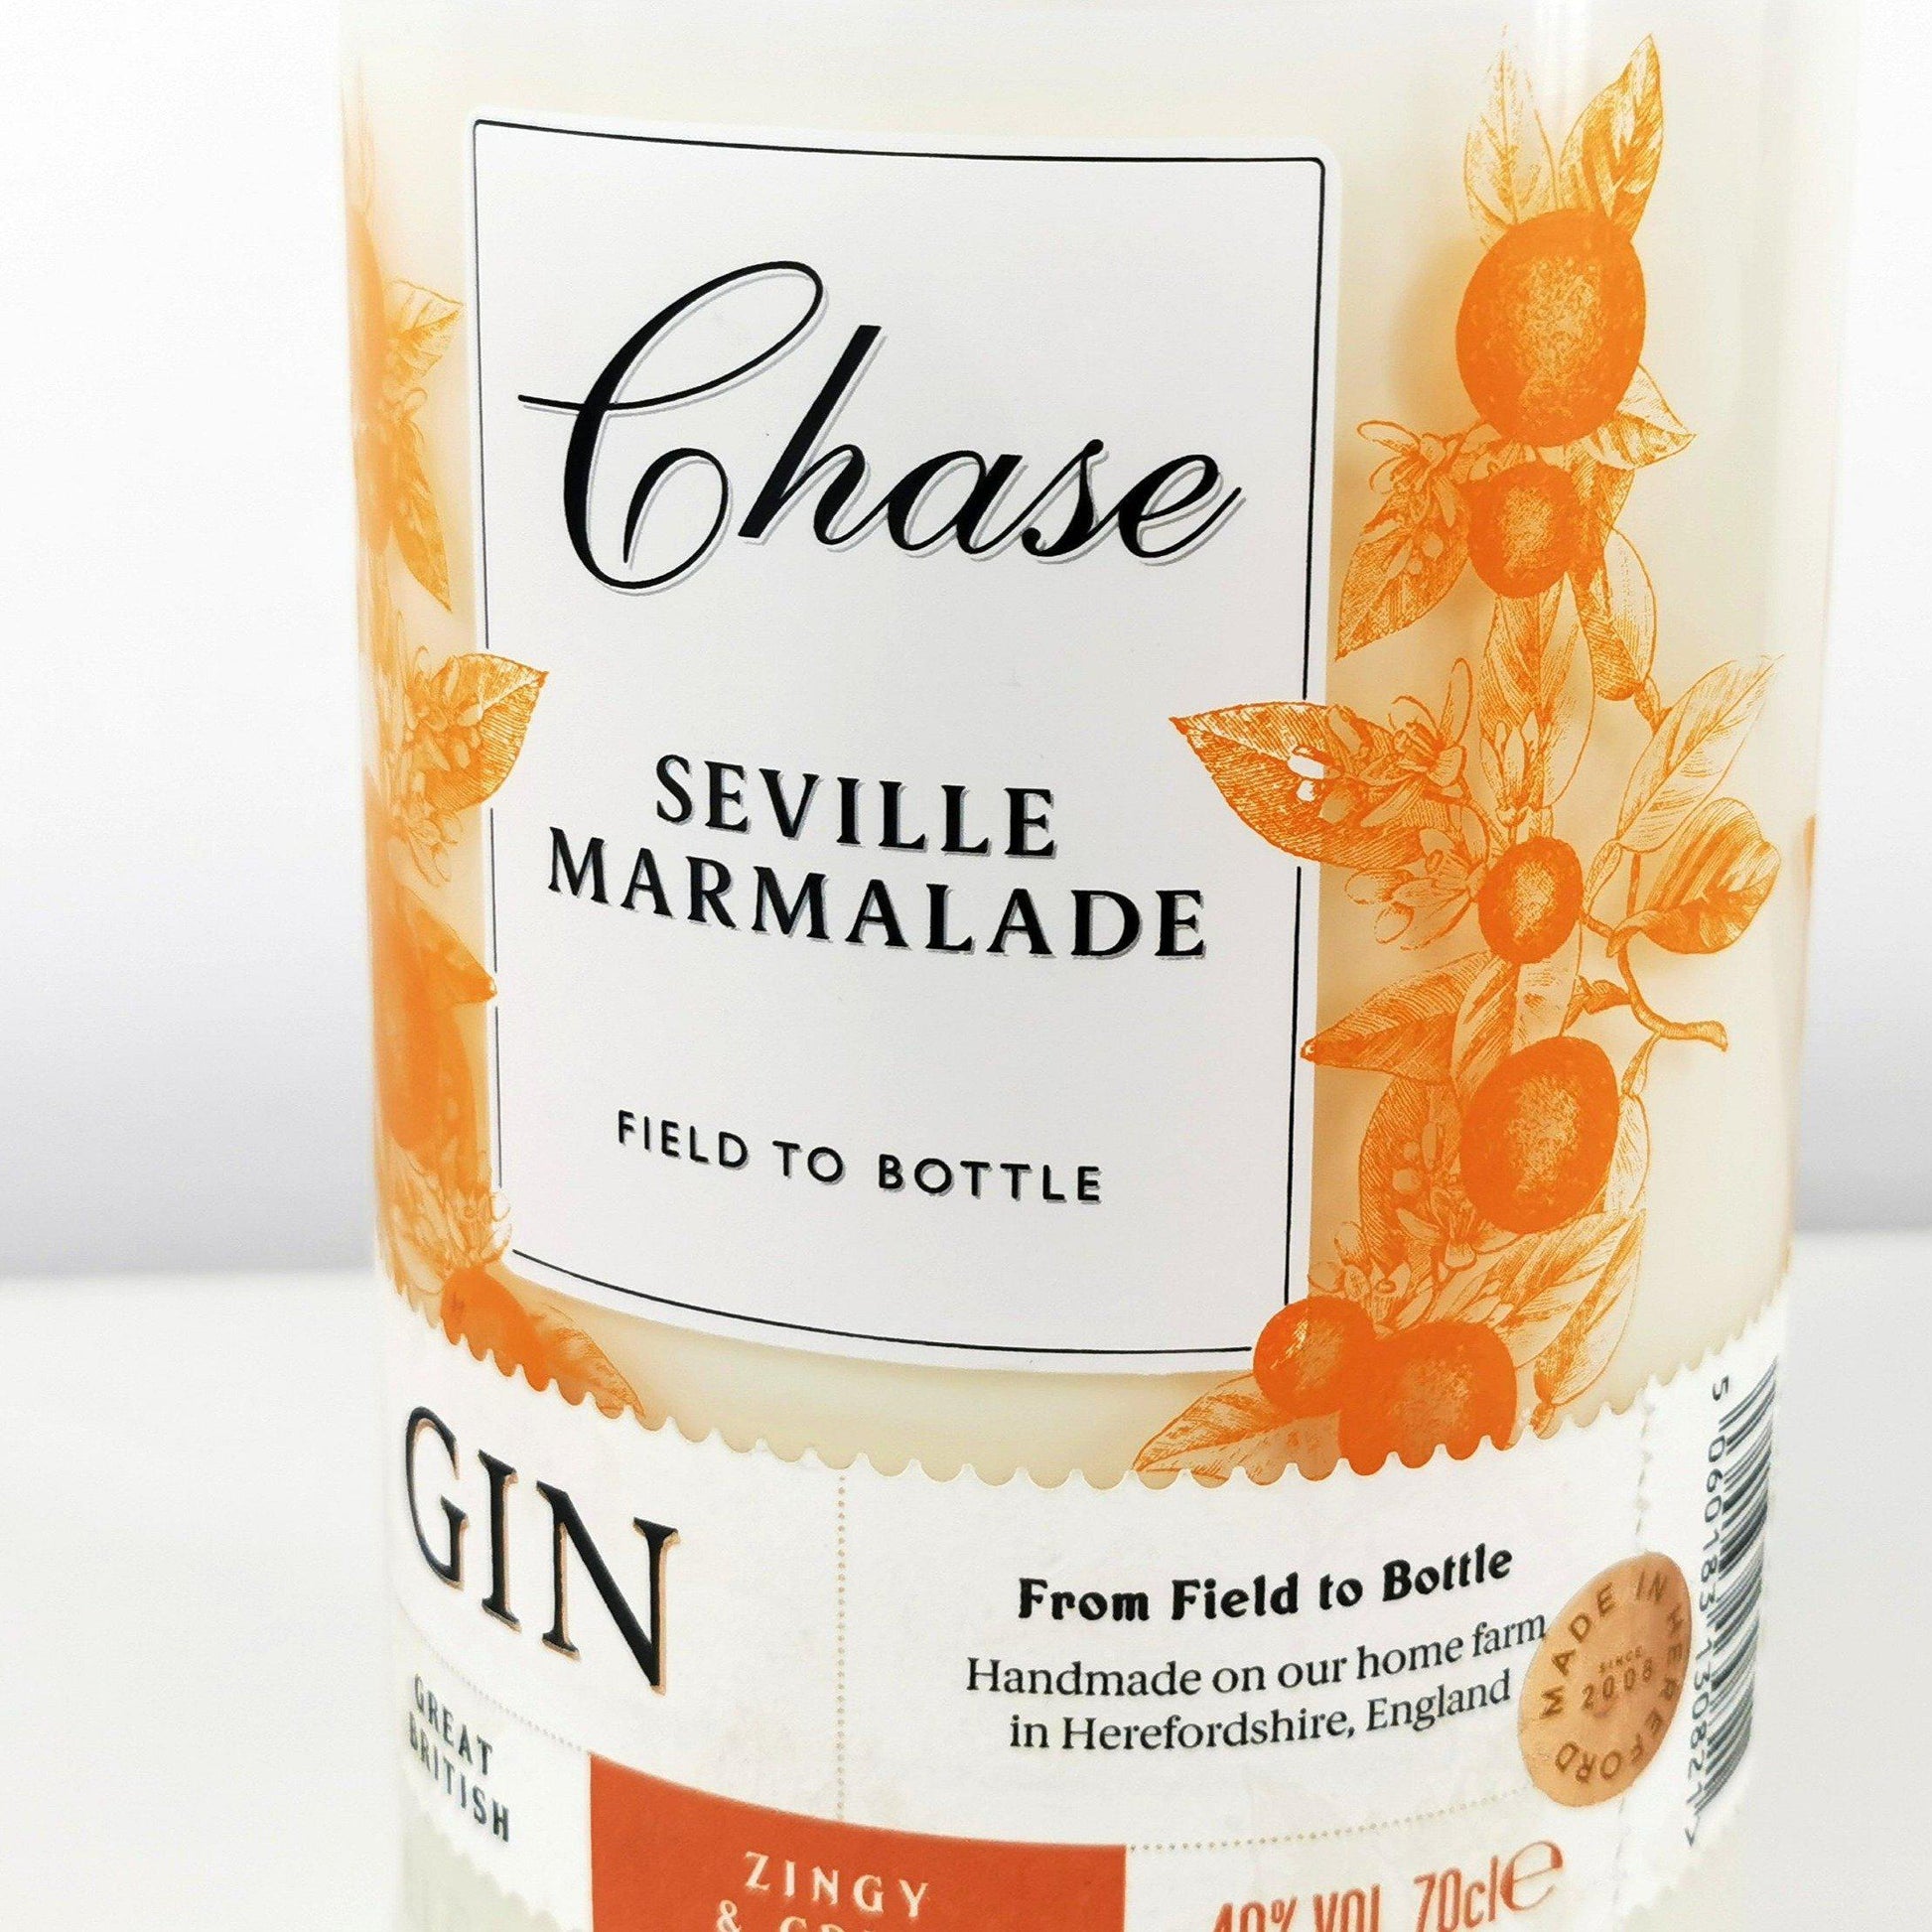 Eco Friendly-Chase Seville Marmalade Gin Bottle Candle-Gin Bottle Candles-Adhock Homeware